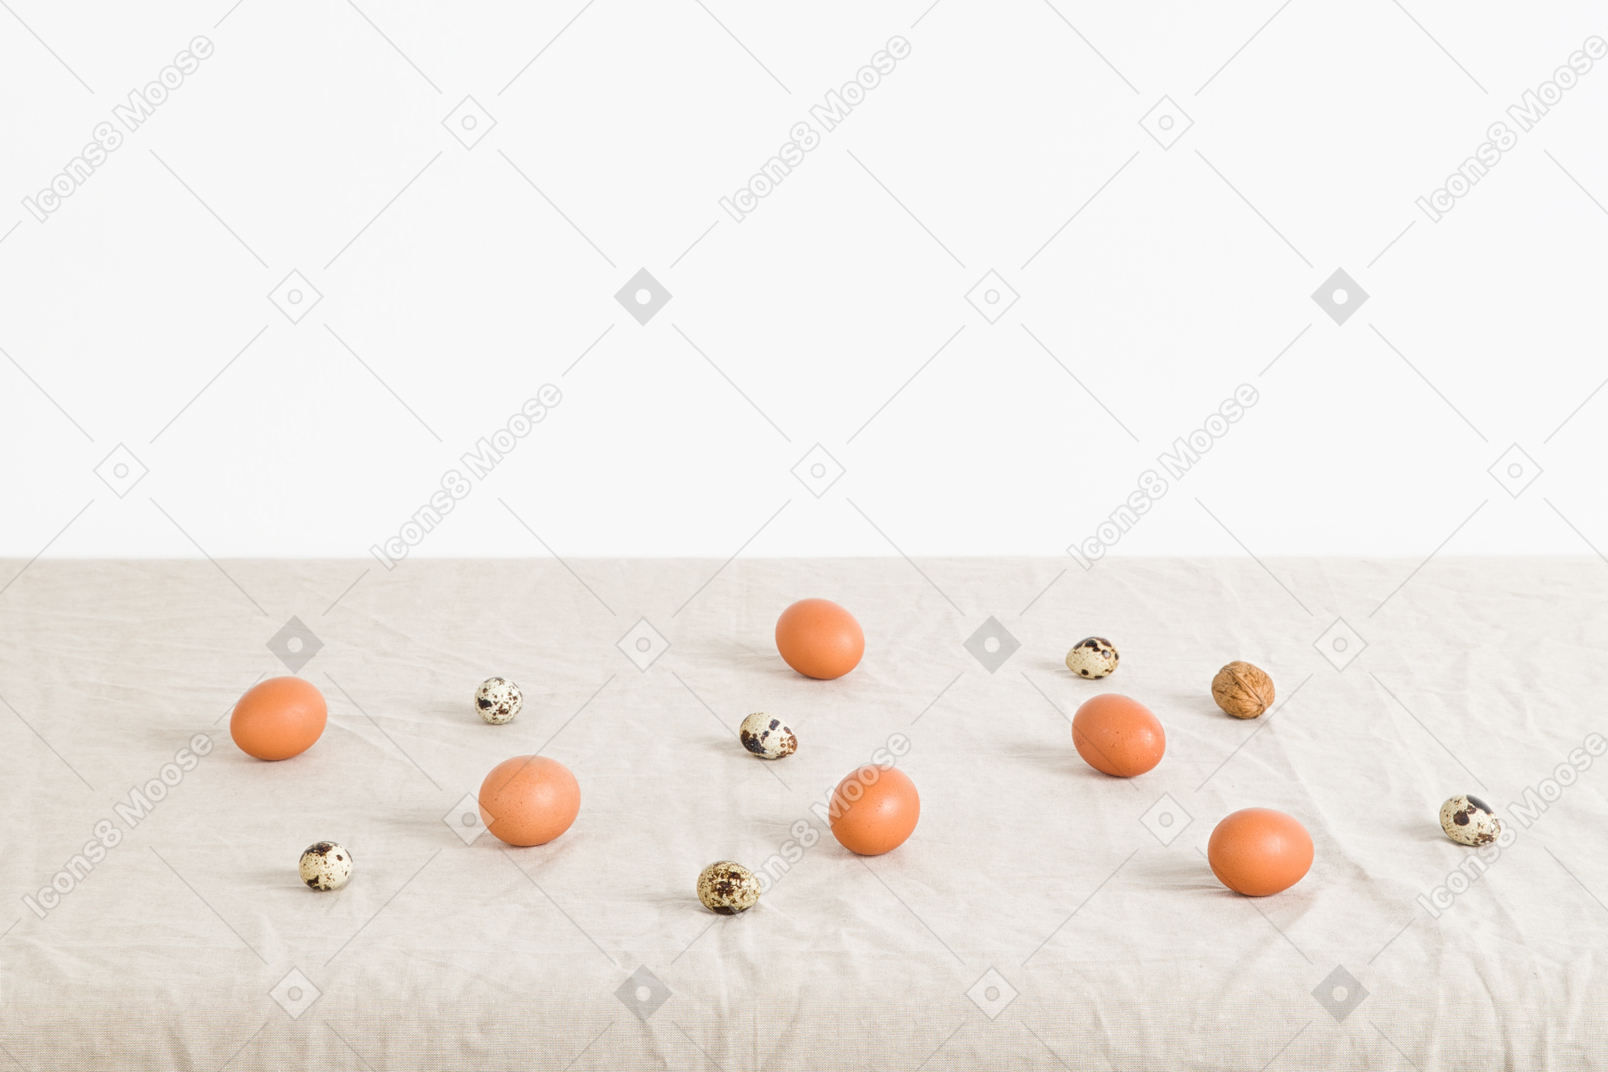 Chicken and quail eggs on a white tablecloth